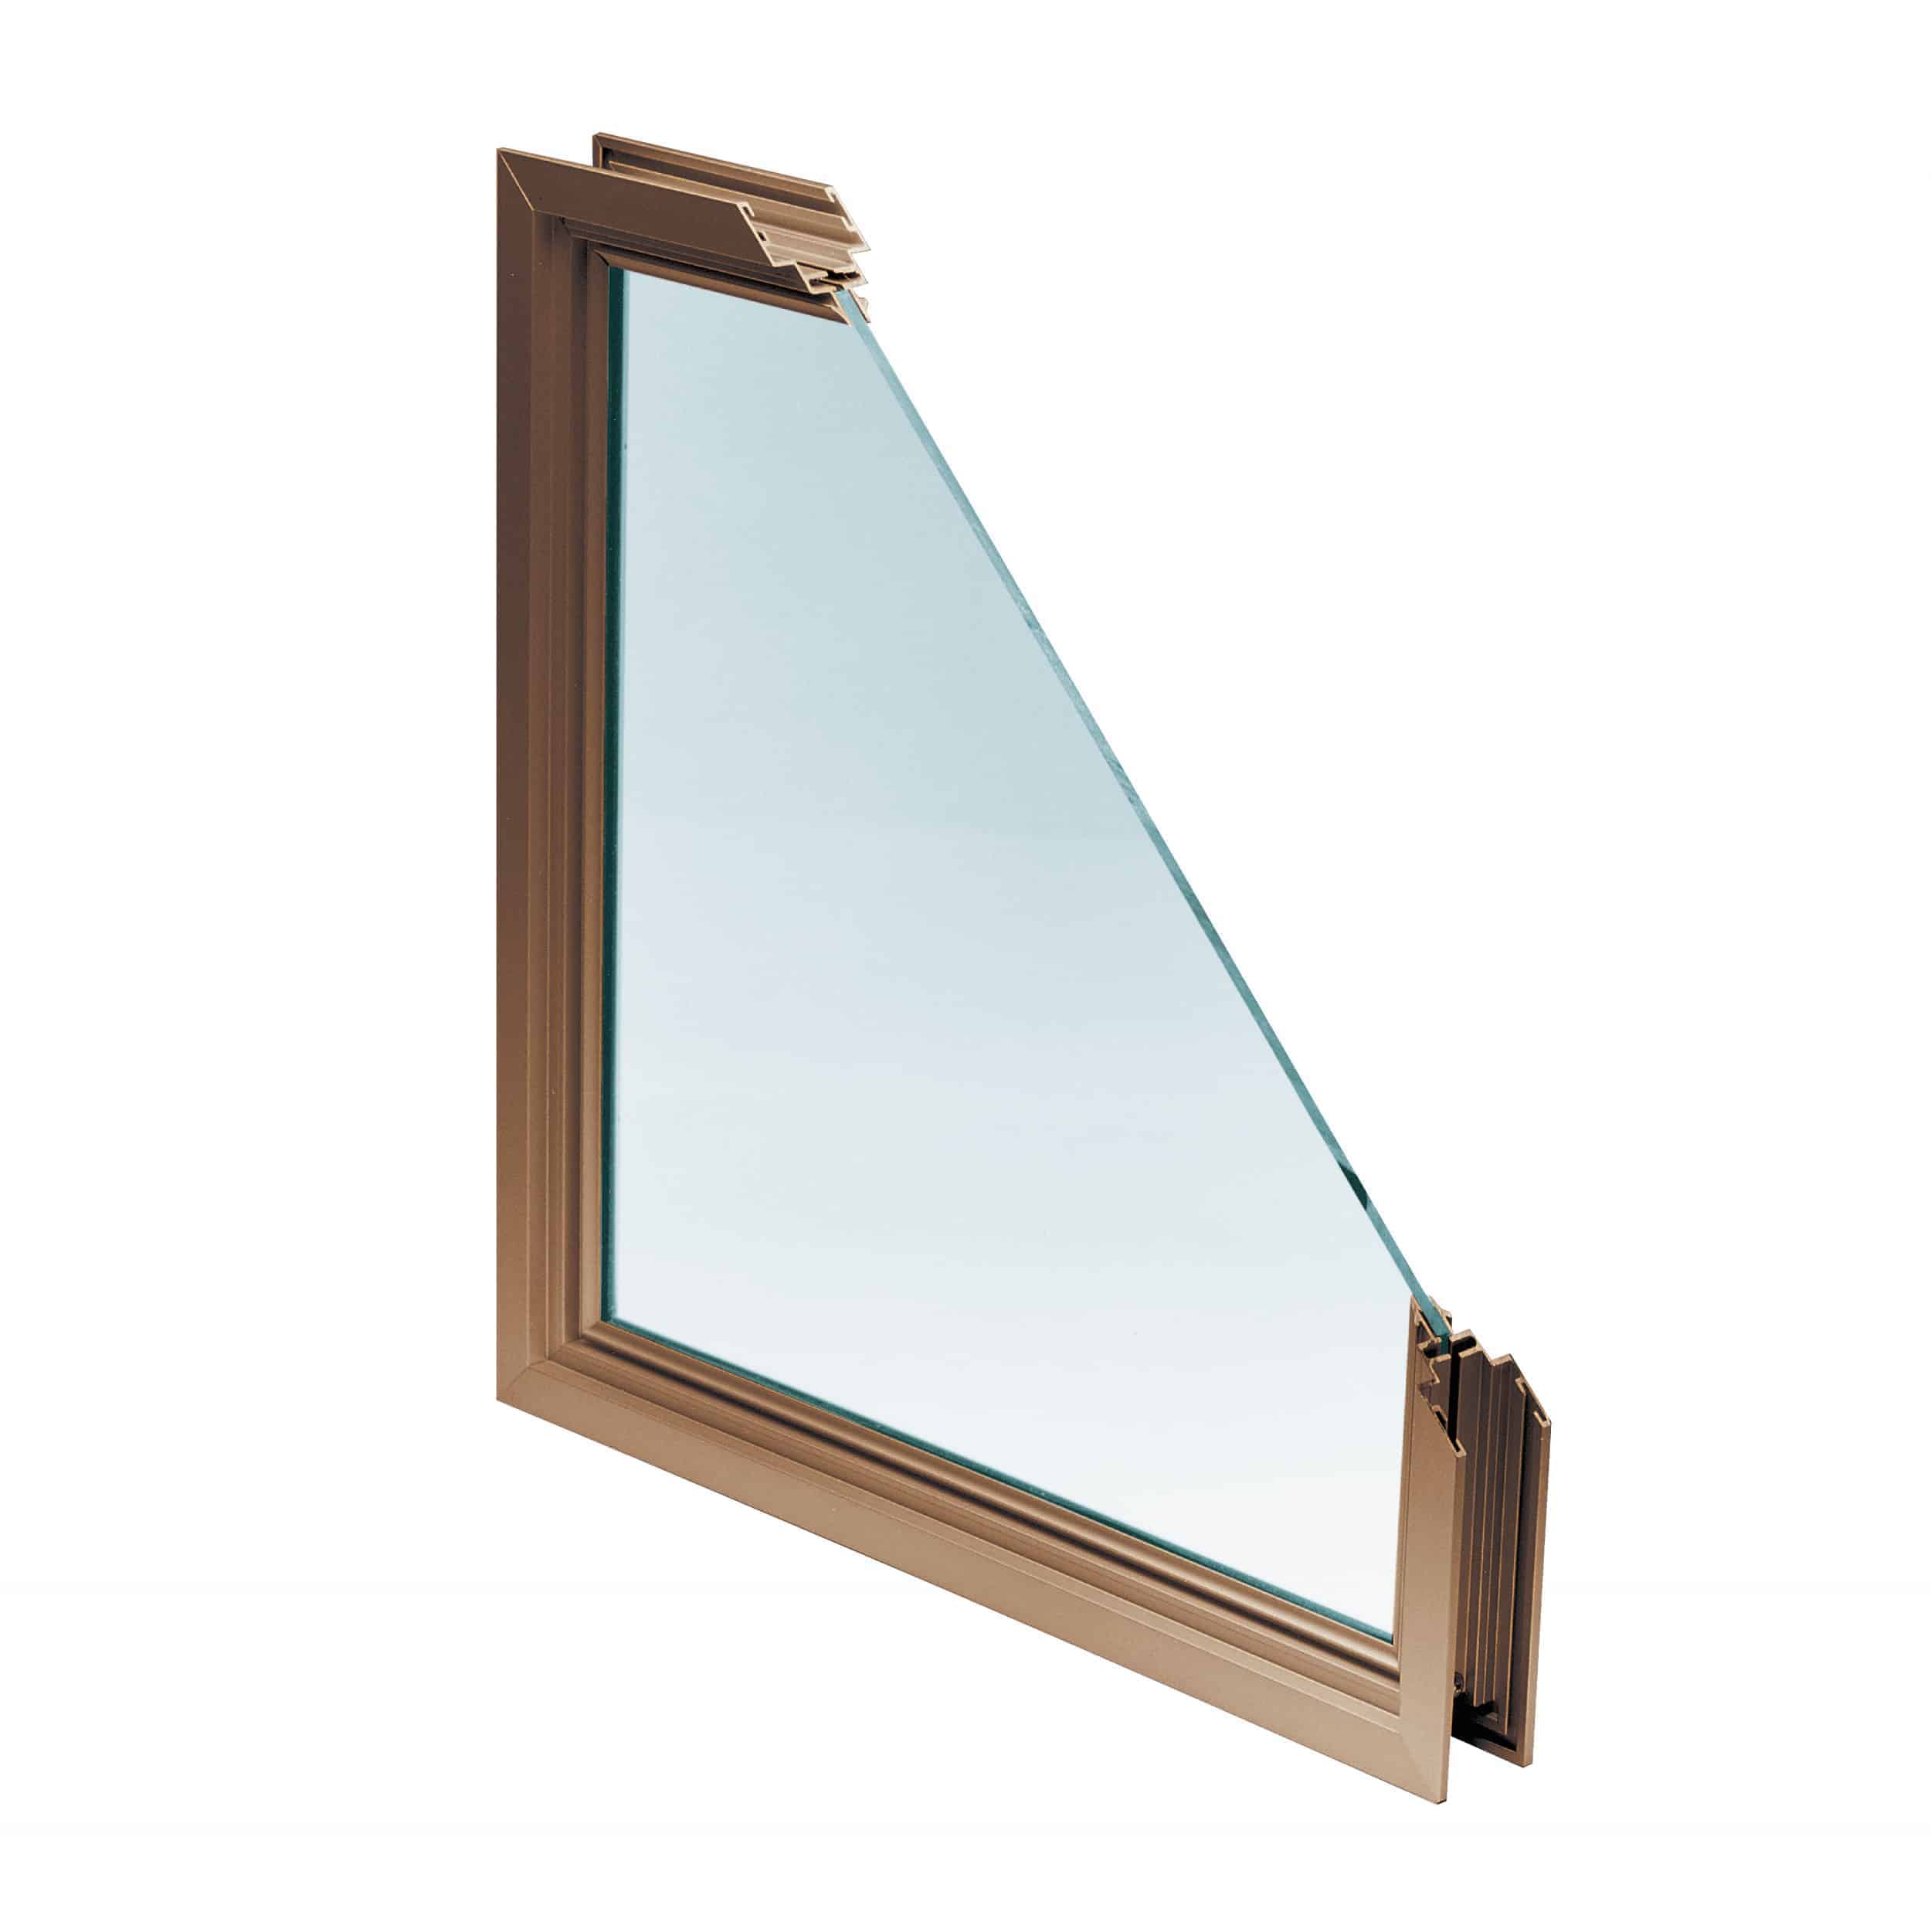 A wooden window with a glass pane.